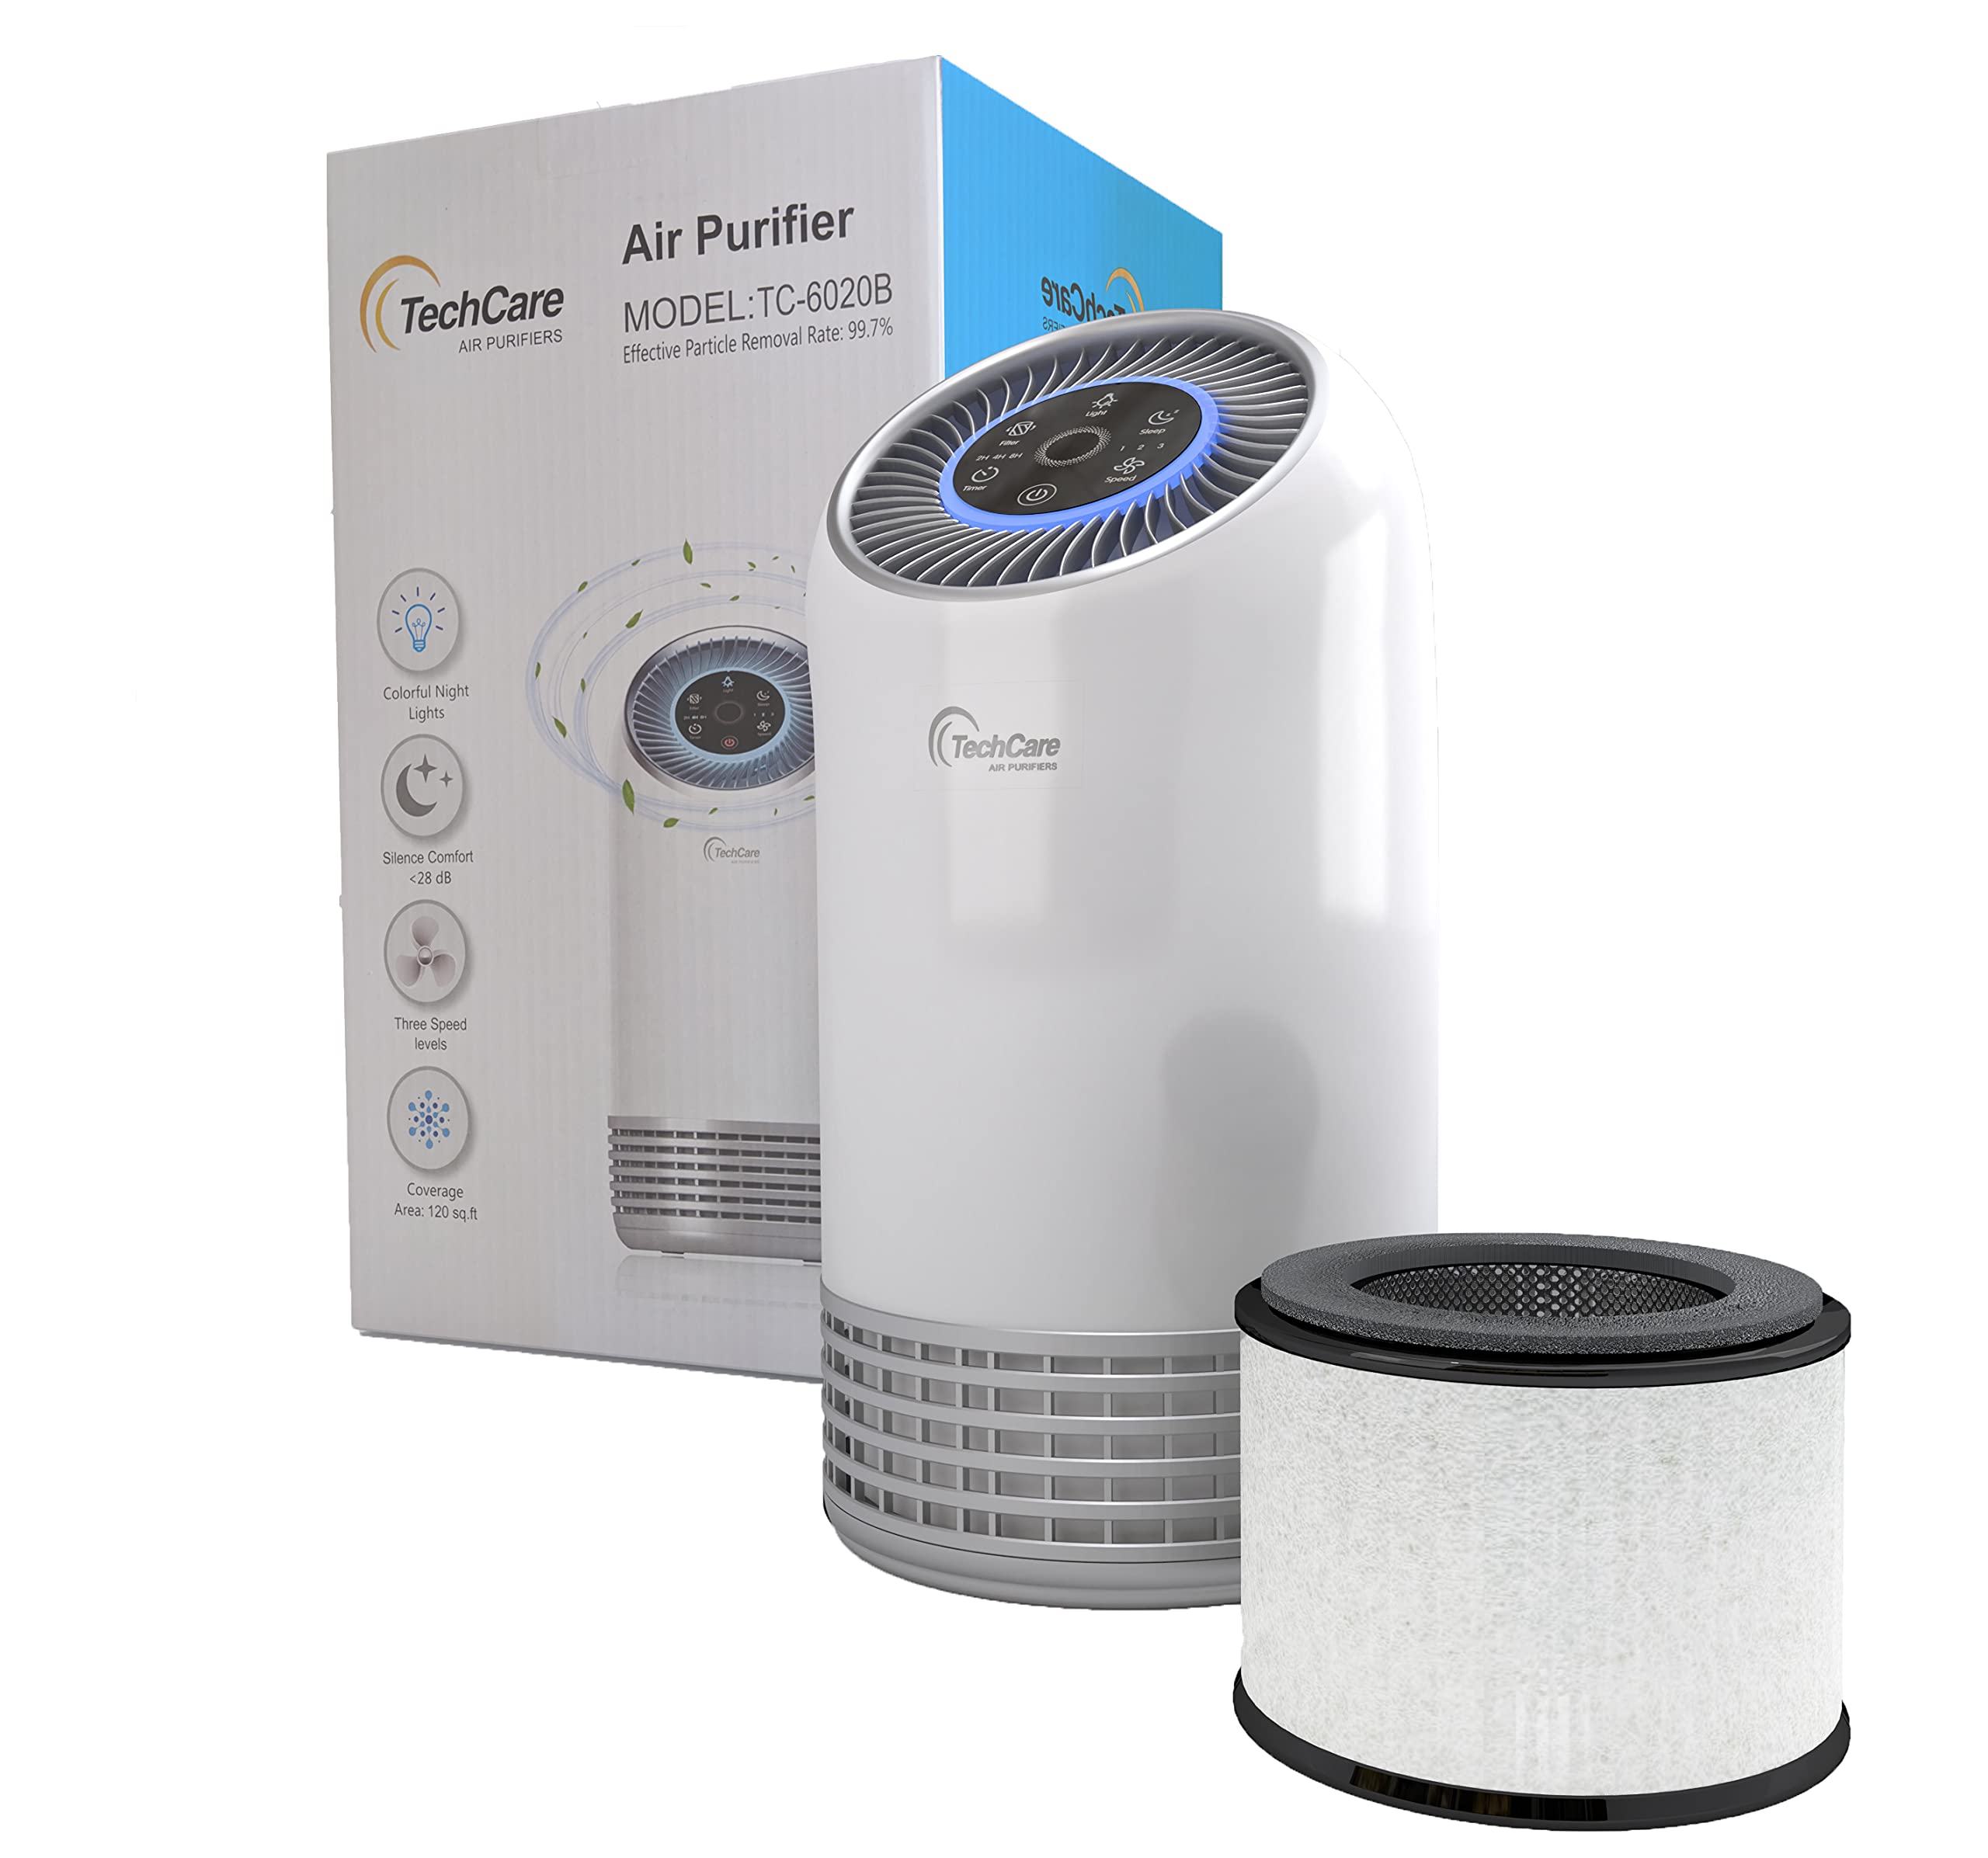 Air Purifier for Migraines